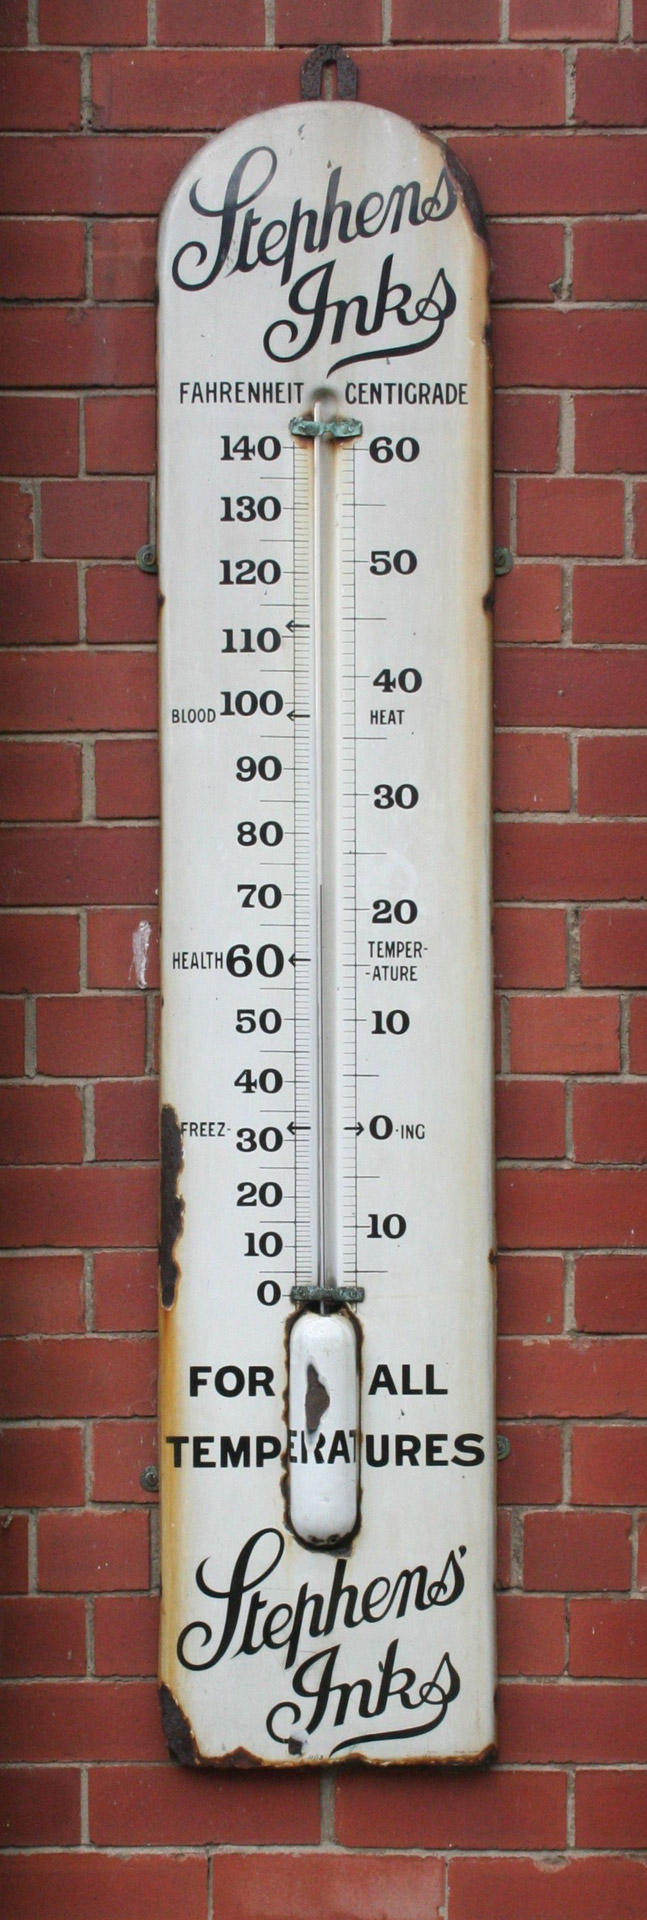 old thermometer stevens free photo